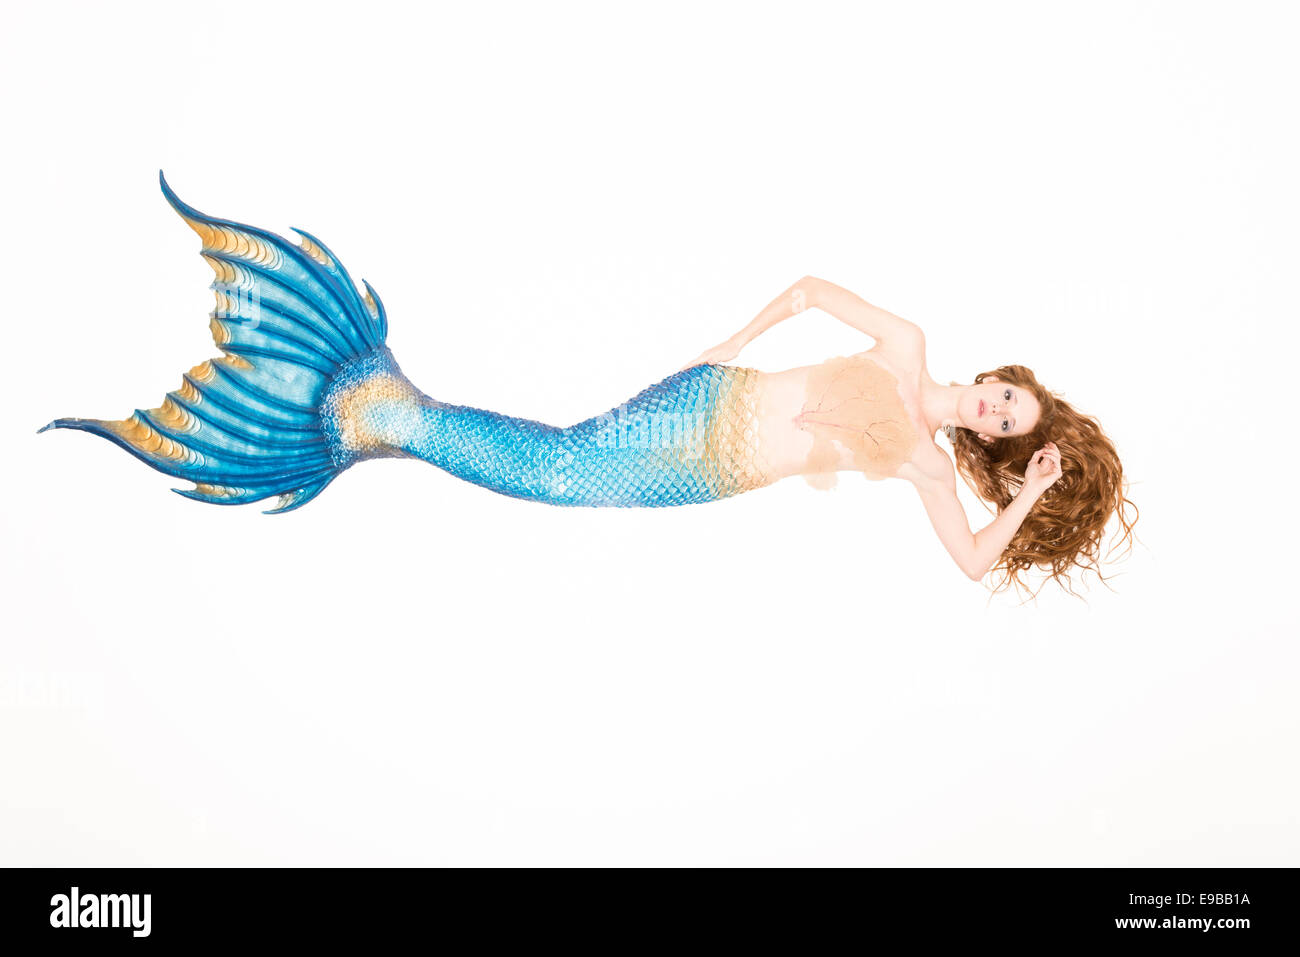 Siren tail Cut Out Stock Images & Pictures - Alamy